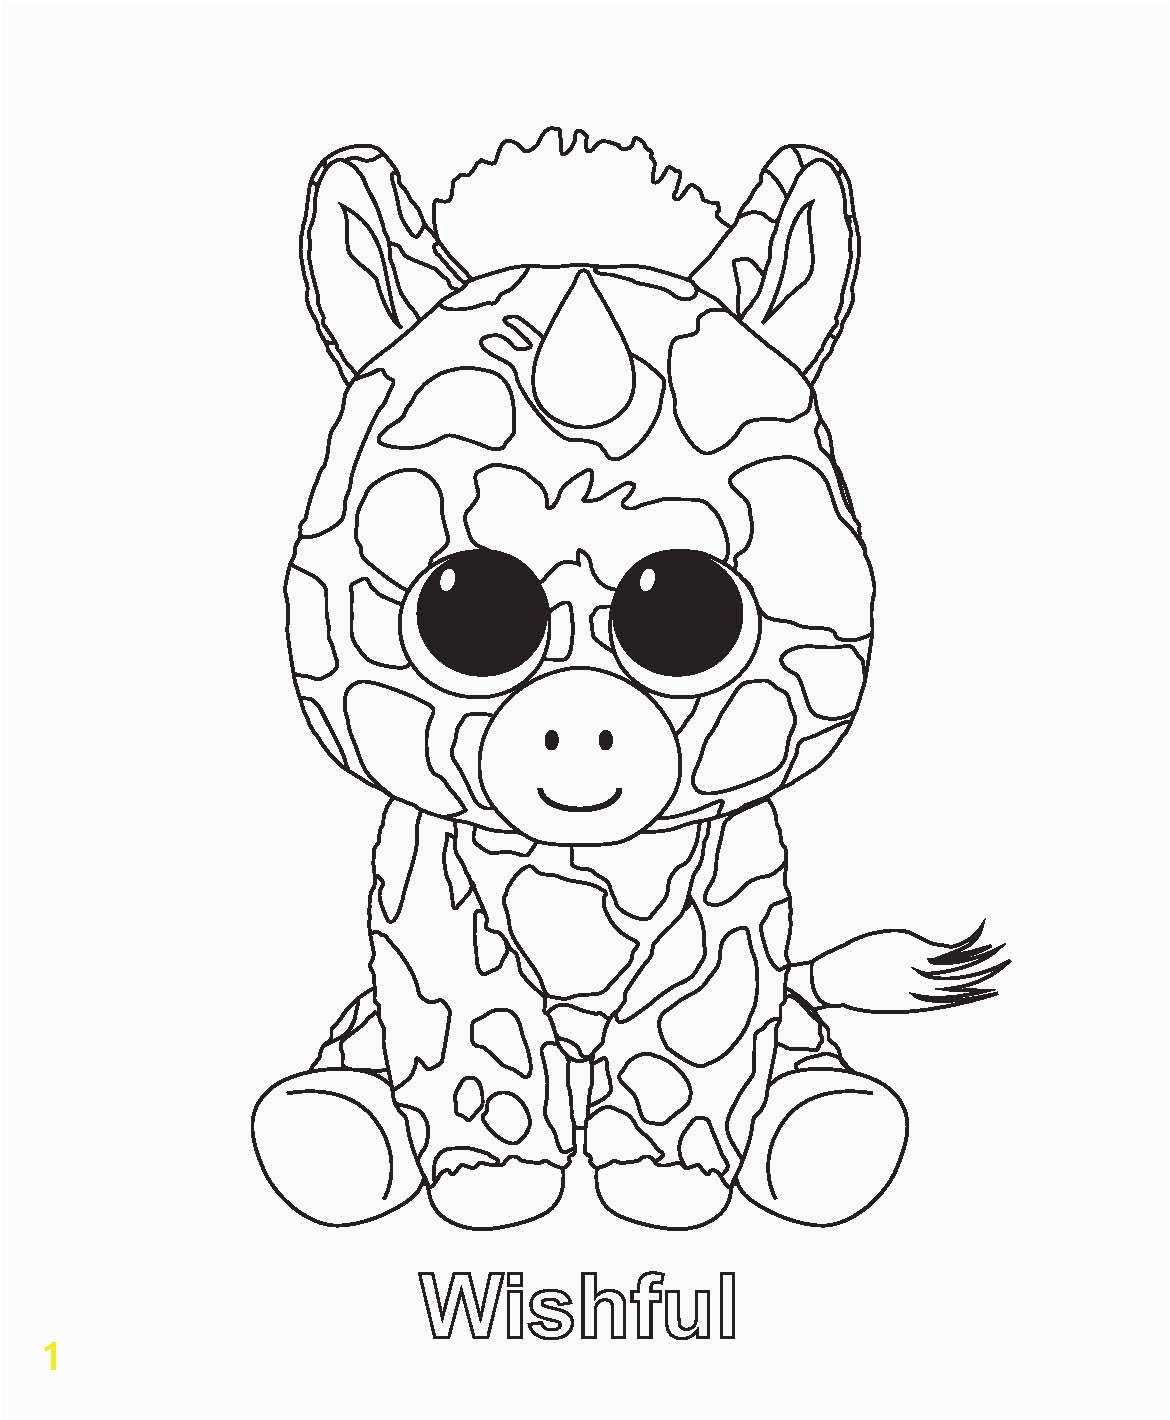 Beanie Boo Coloring Pages Only Beanie Boo Coloring Pages Lily Jo Pinterest